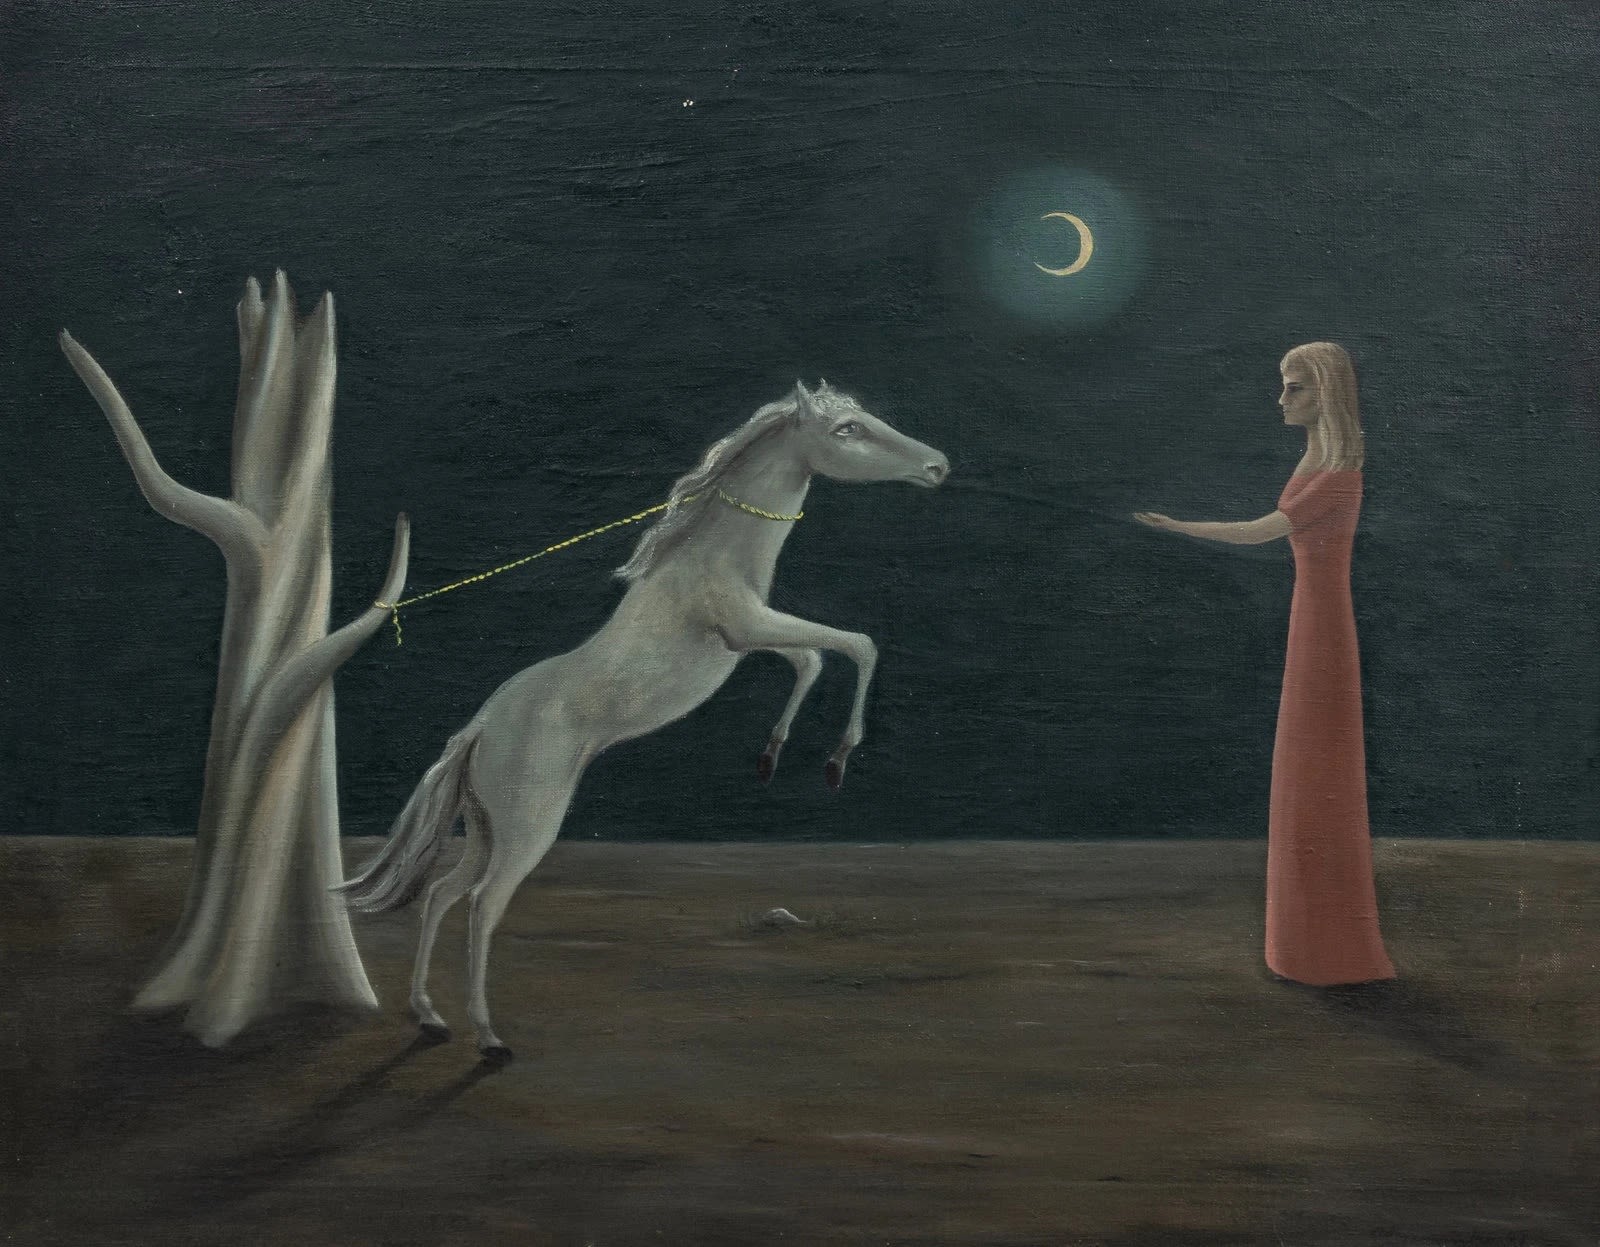 Untitled painting by Gertrude Abercrombie, depicting a woman in a pink dress reaching out to a rearing white horse, with a crescent moon overhead and surreal tree forms, achieving the highest auction record for an Abercrombie artwork at Hindman in December 2022, a sought-after piece for collectors through art advisory services investing in significant American surrealism.